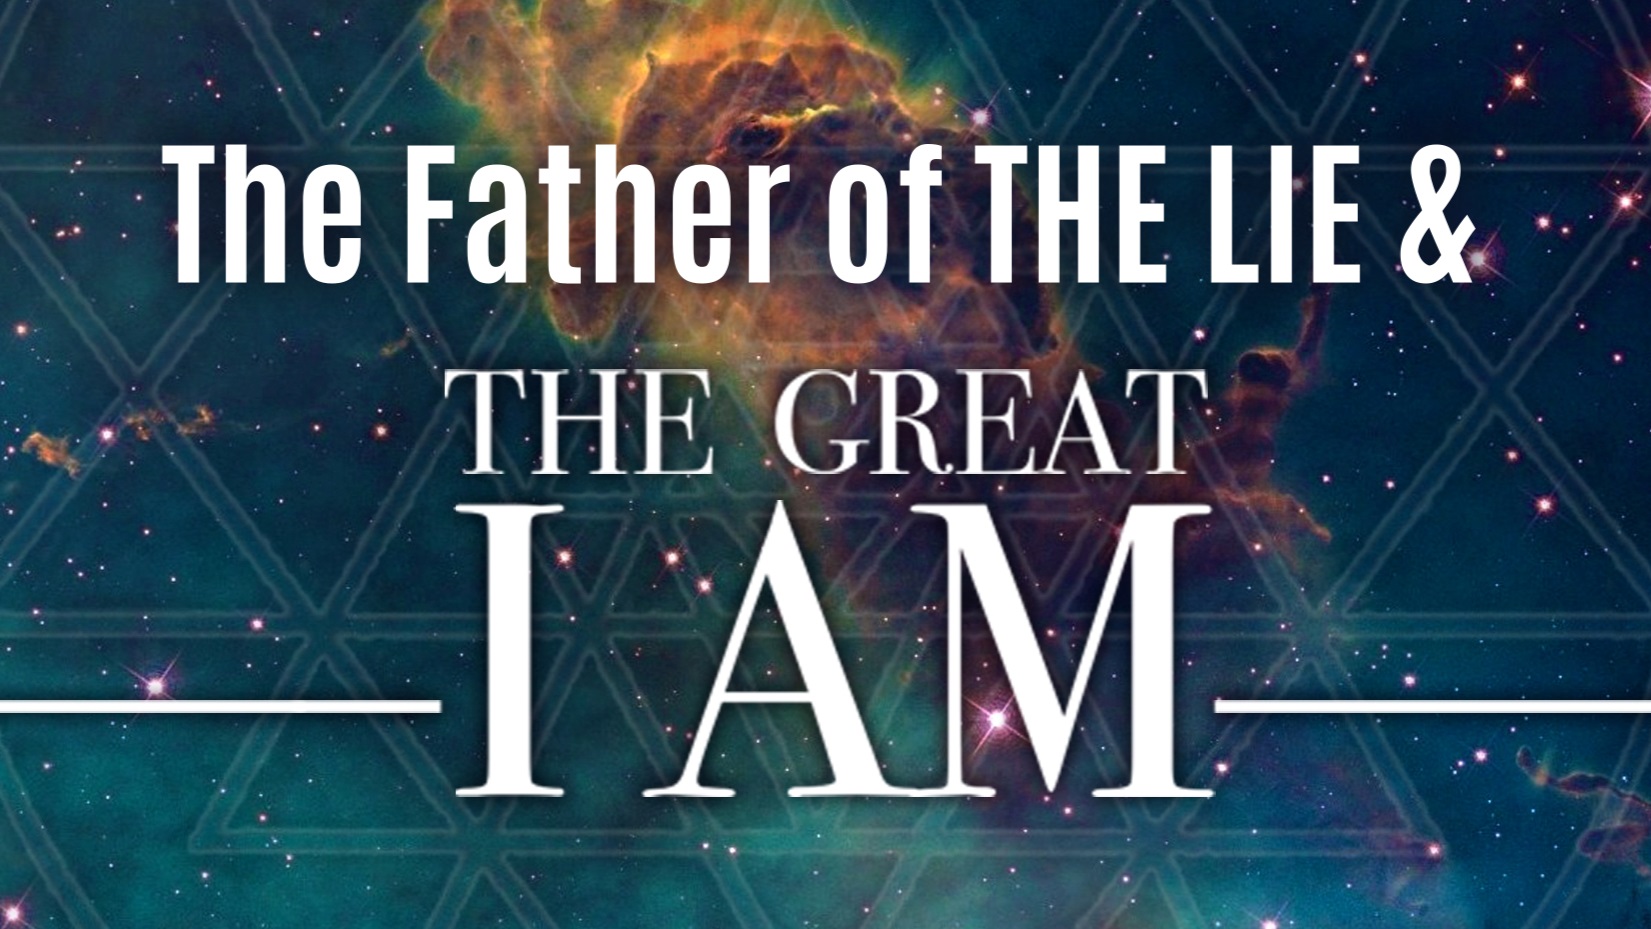 Reflection Questions: The Father of the Lie and the Great ‘I AM’ (John 8.44-59)